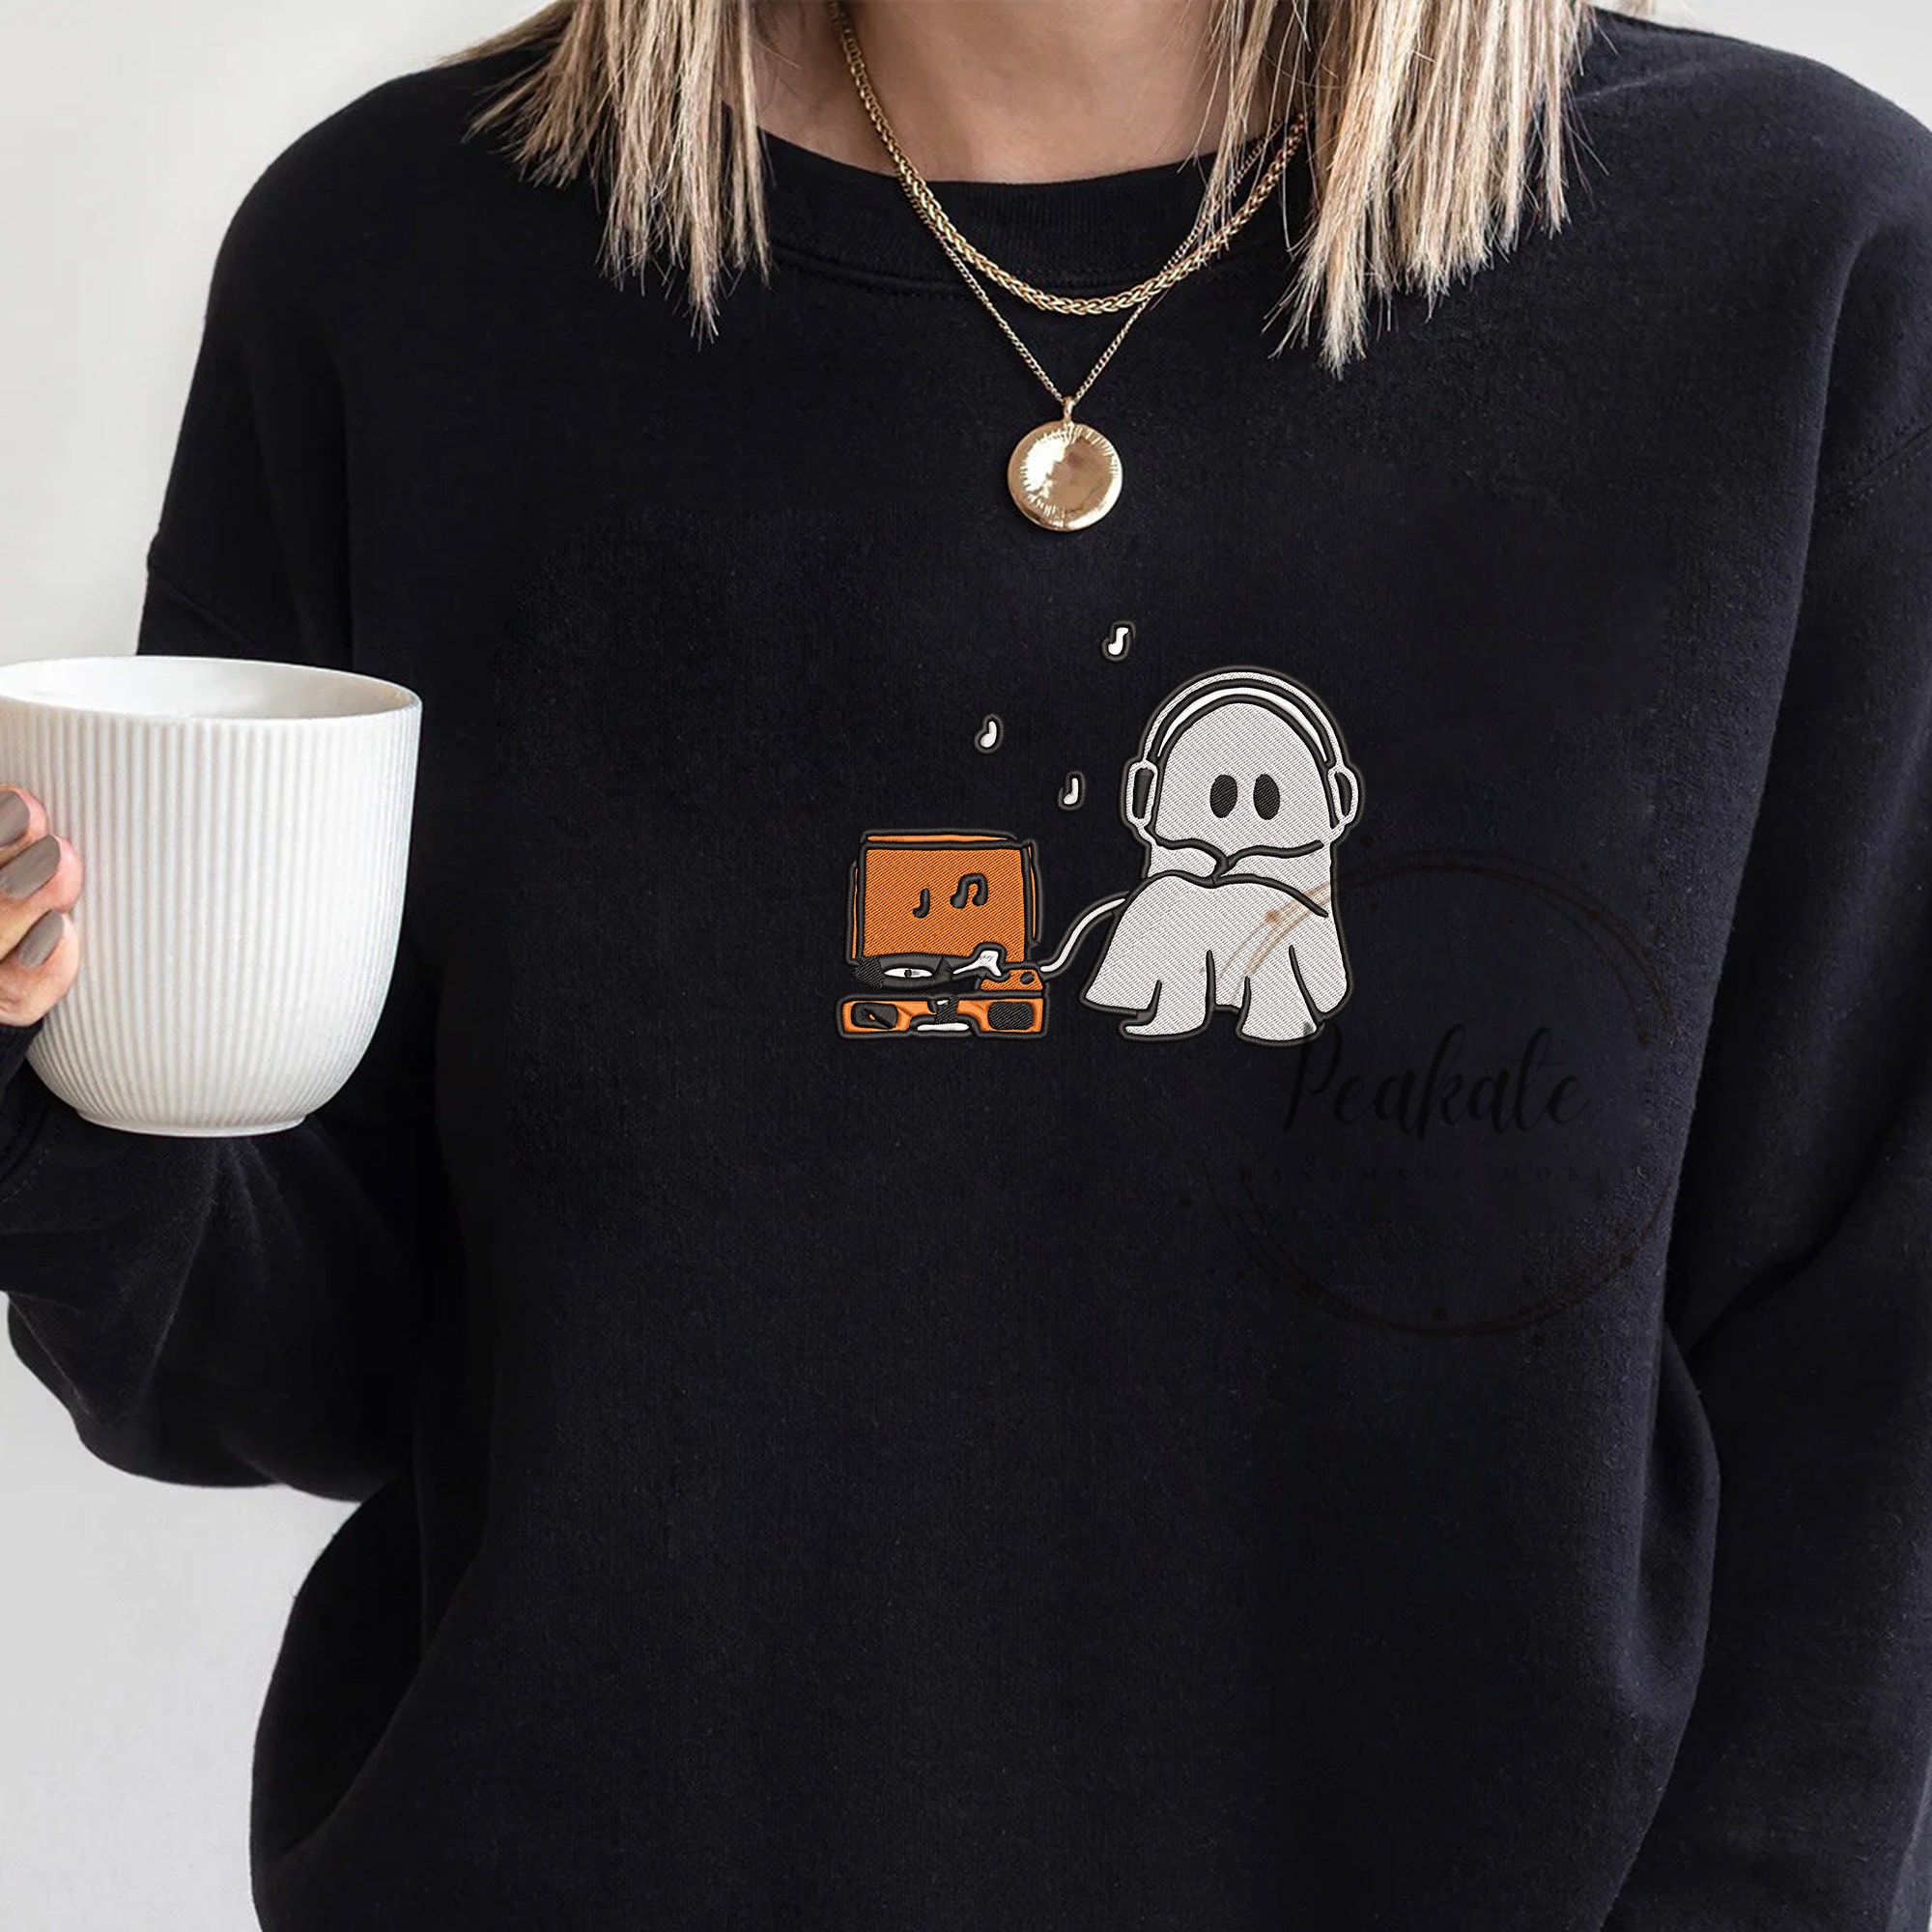 Discover Embroidered Ghost Malone Sweatshirt, Cute Halloween boo Embroidered Sweatshirt